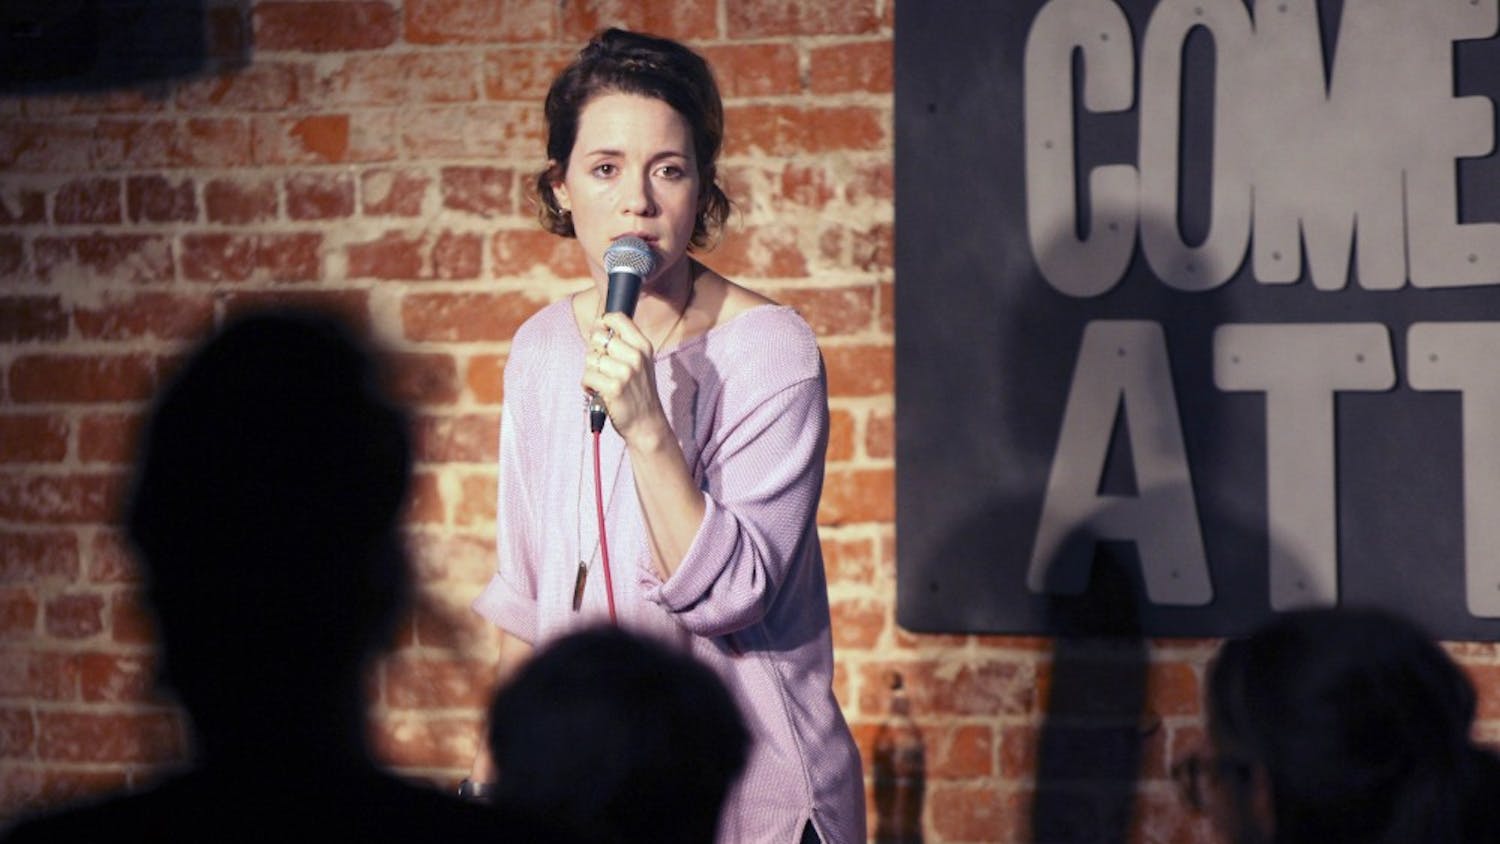 Alice Wetterlund performs at The Comedy Attic on Friday.  Wetterlund headlined at the Bloomington, Ind. comedy venue on June 17 and June 18.